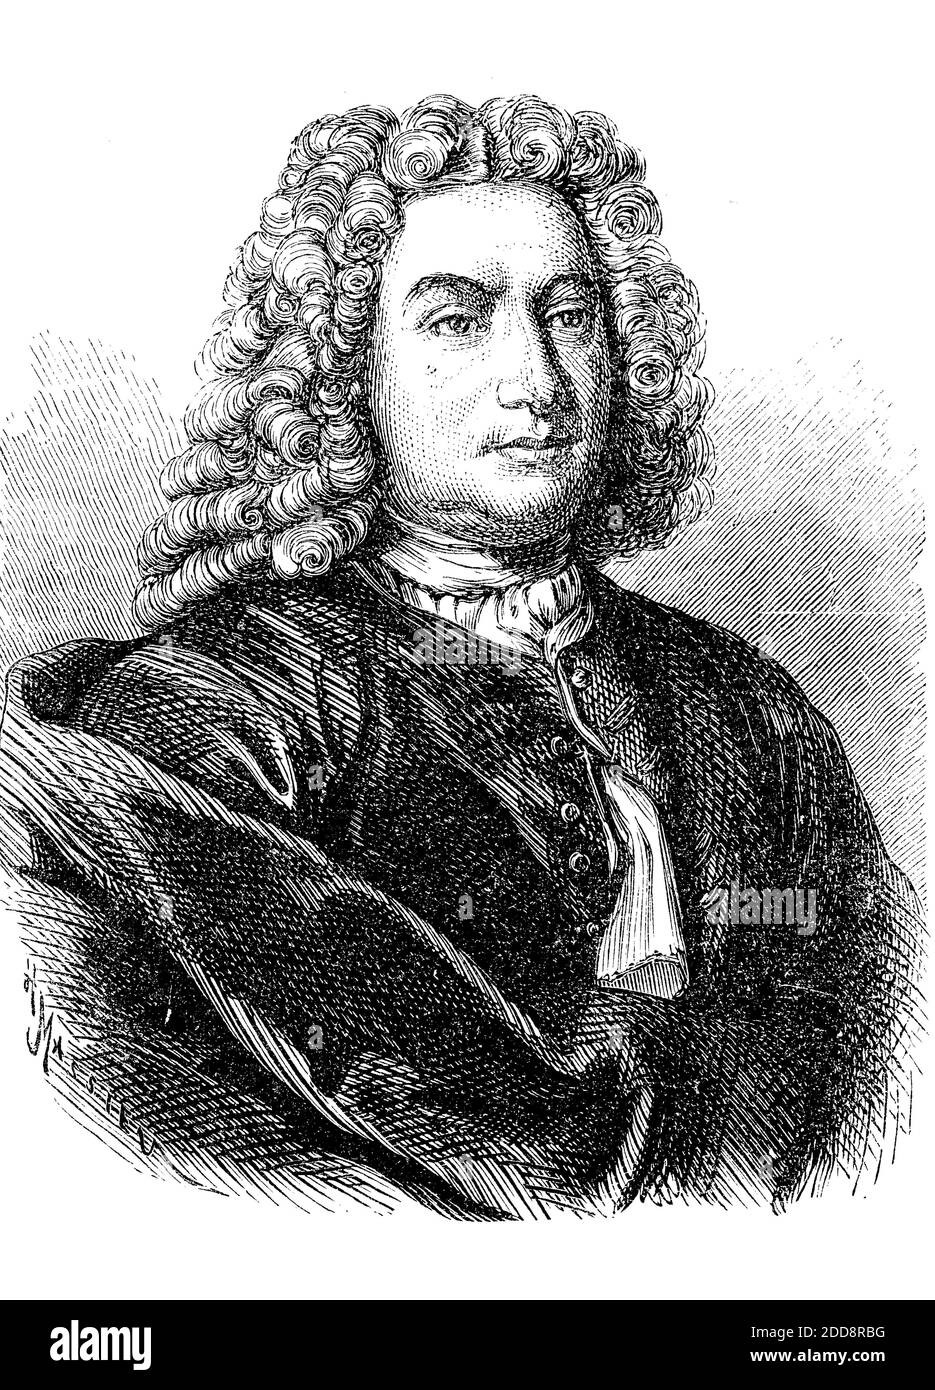 Daniel Bernoulli, 8 February 1700 - 17 March 1782, Swiss mathematician and physicist and was one of the many prominent mathematicians in the Bernoulli family from Basel  /  Daniel Bernoulli, 8. Februar 1700 - 17. März 1782, ein Schweizer Mathematiker und Physiker aus der Gelehrtenfamilie Bernoulli, Historisch, historical, digital improved reproduction of an original from the 19th century / digitale Reproduktion einer Originalvorlage aus dem 19. Jahrhundert, Stock Photo